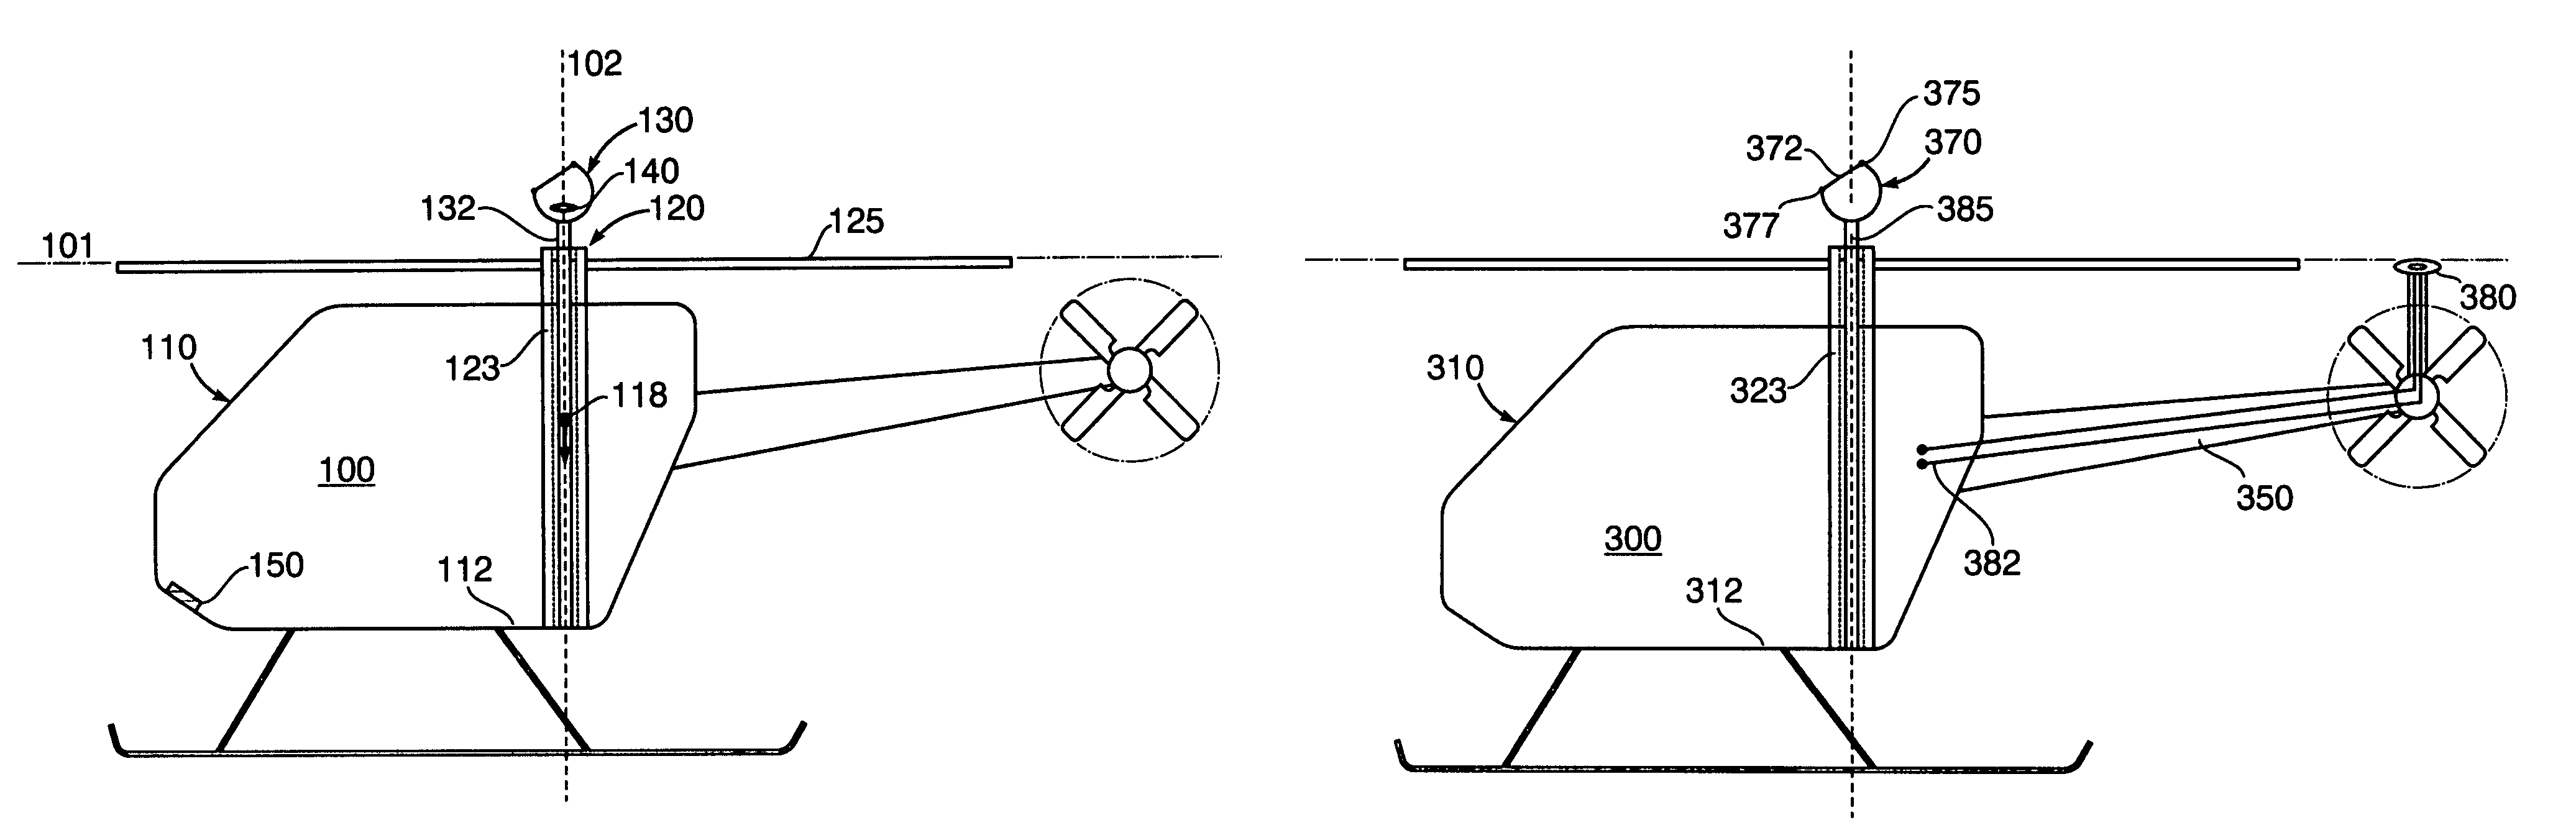 Battery charging arrangement for unmanned aerial vehicle utilizing the electromagnetic field associated with utility power lines to generate power to inductively charge energy supplies